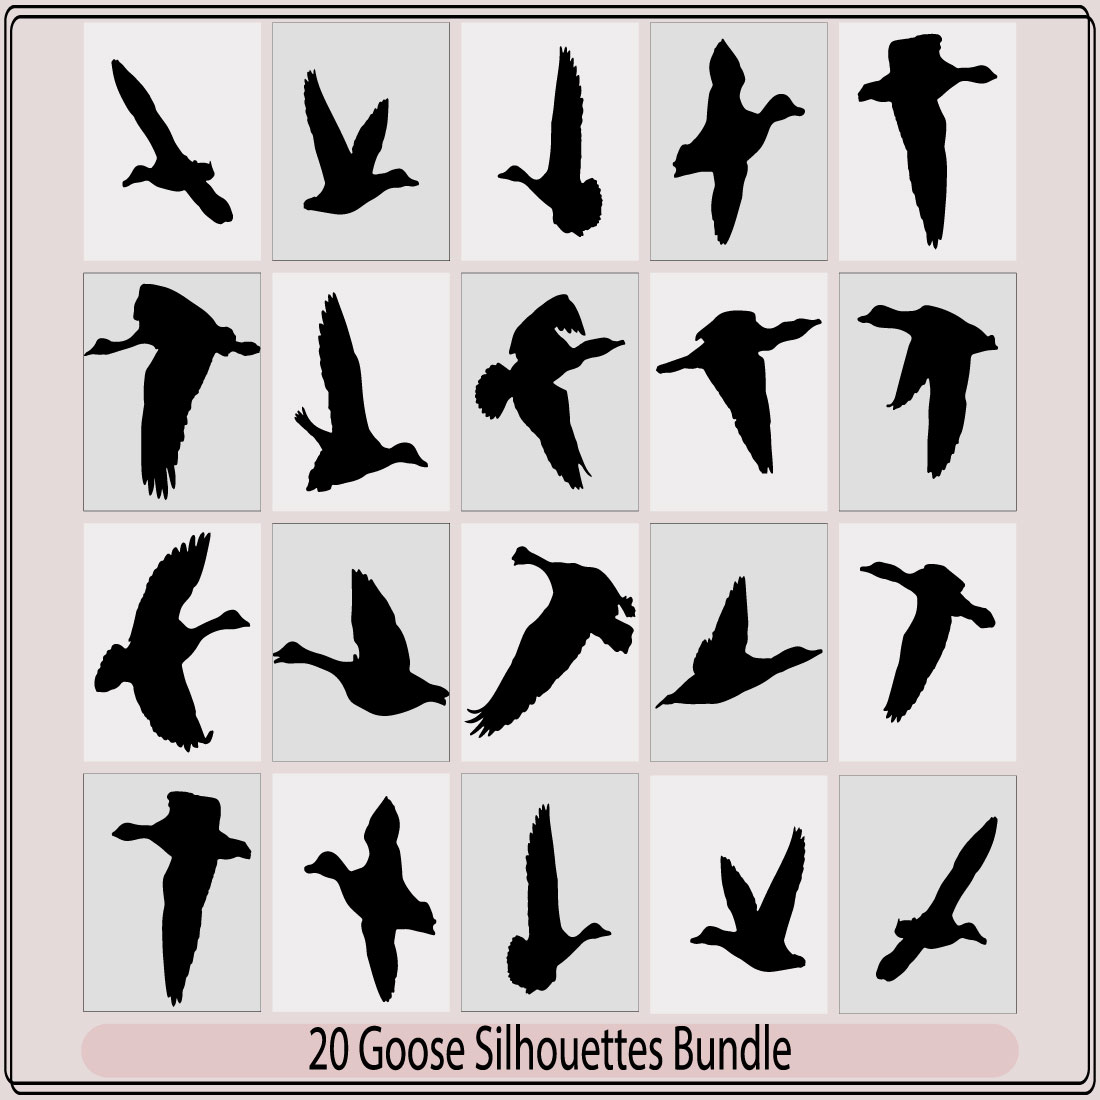 Goose silhouette iconssilhouette goose on white background,goose vector silhouette,flying goose silhouette vector logo cover image.